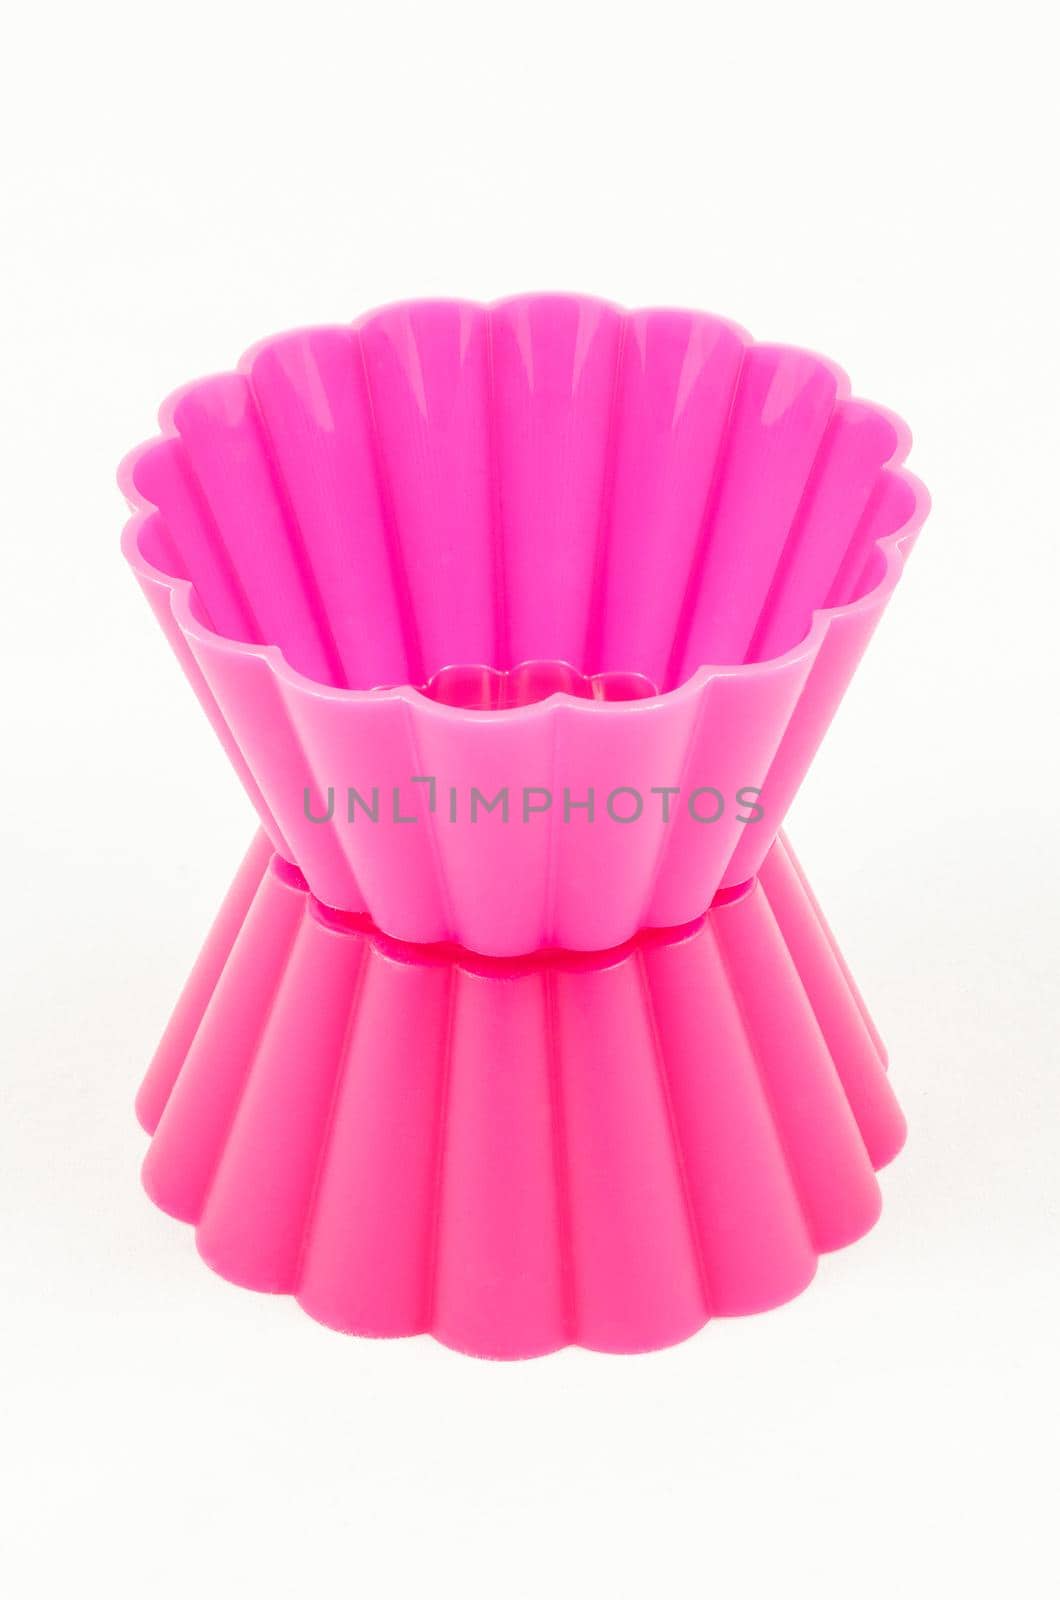 Pink silicone cake cups isolated on white background